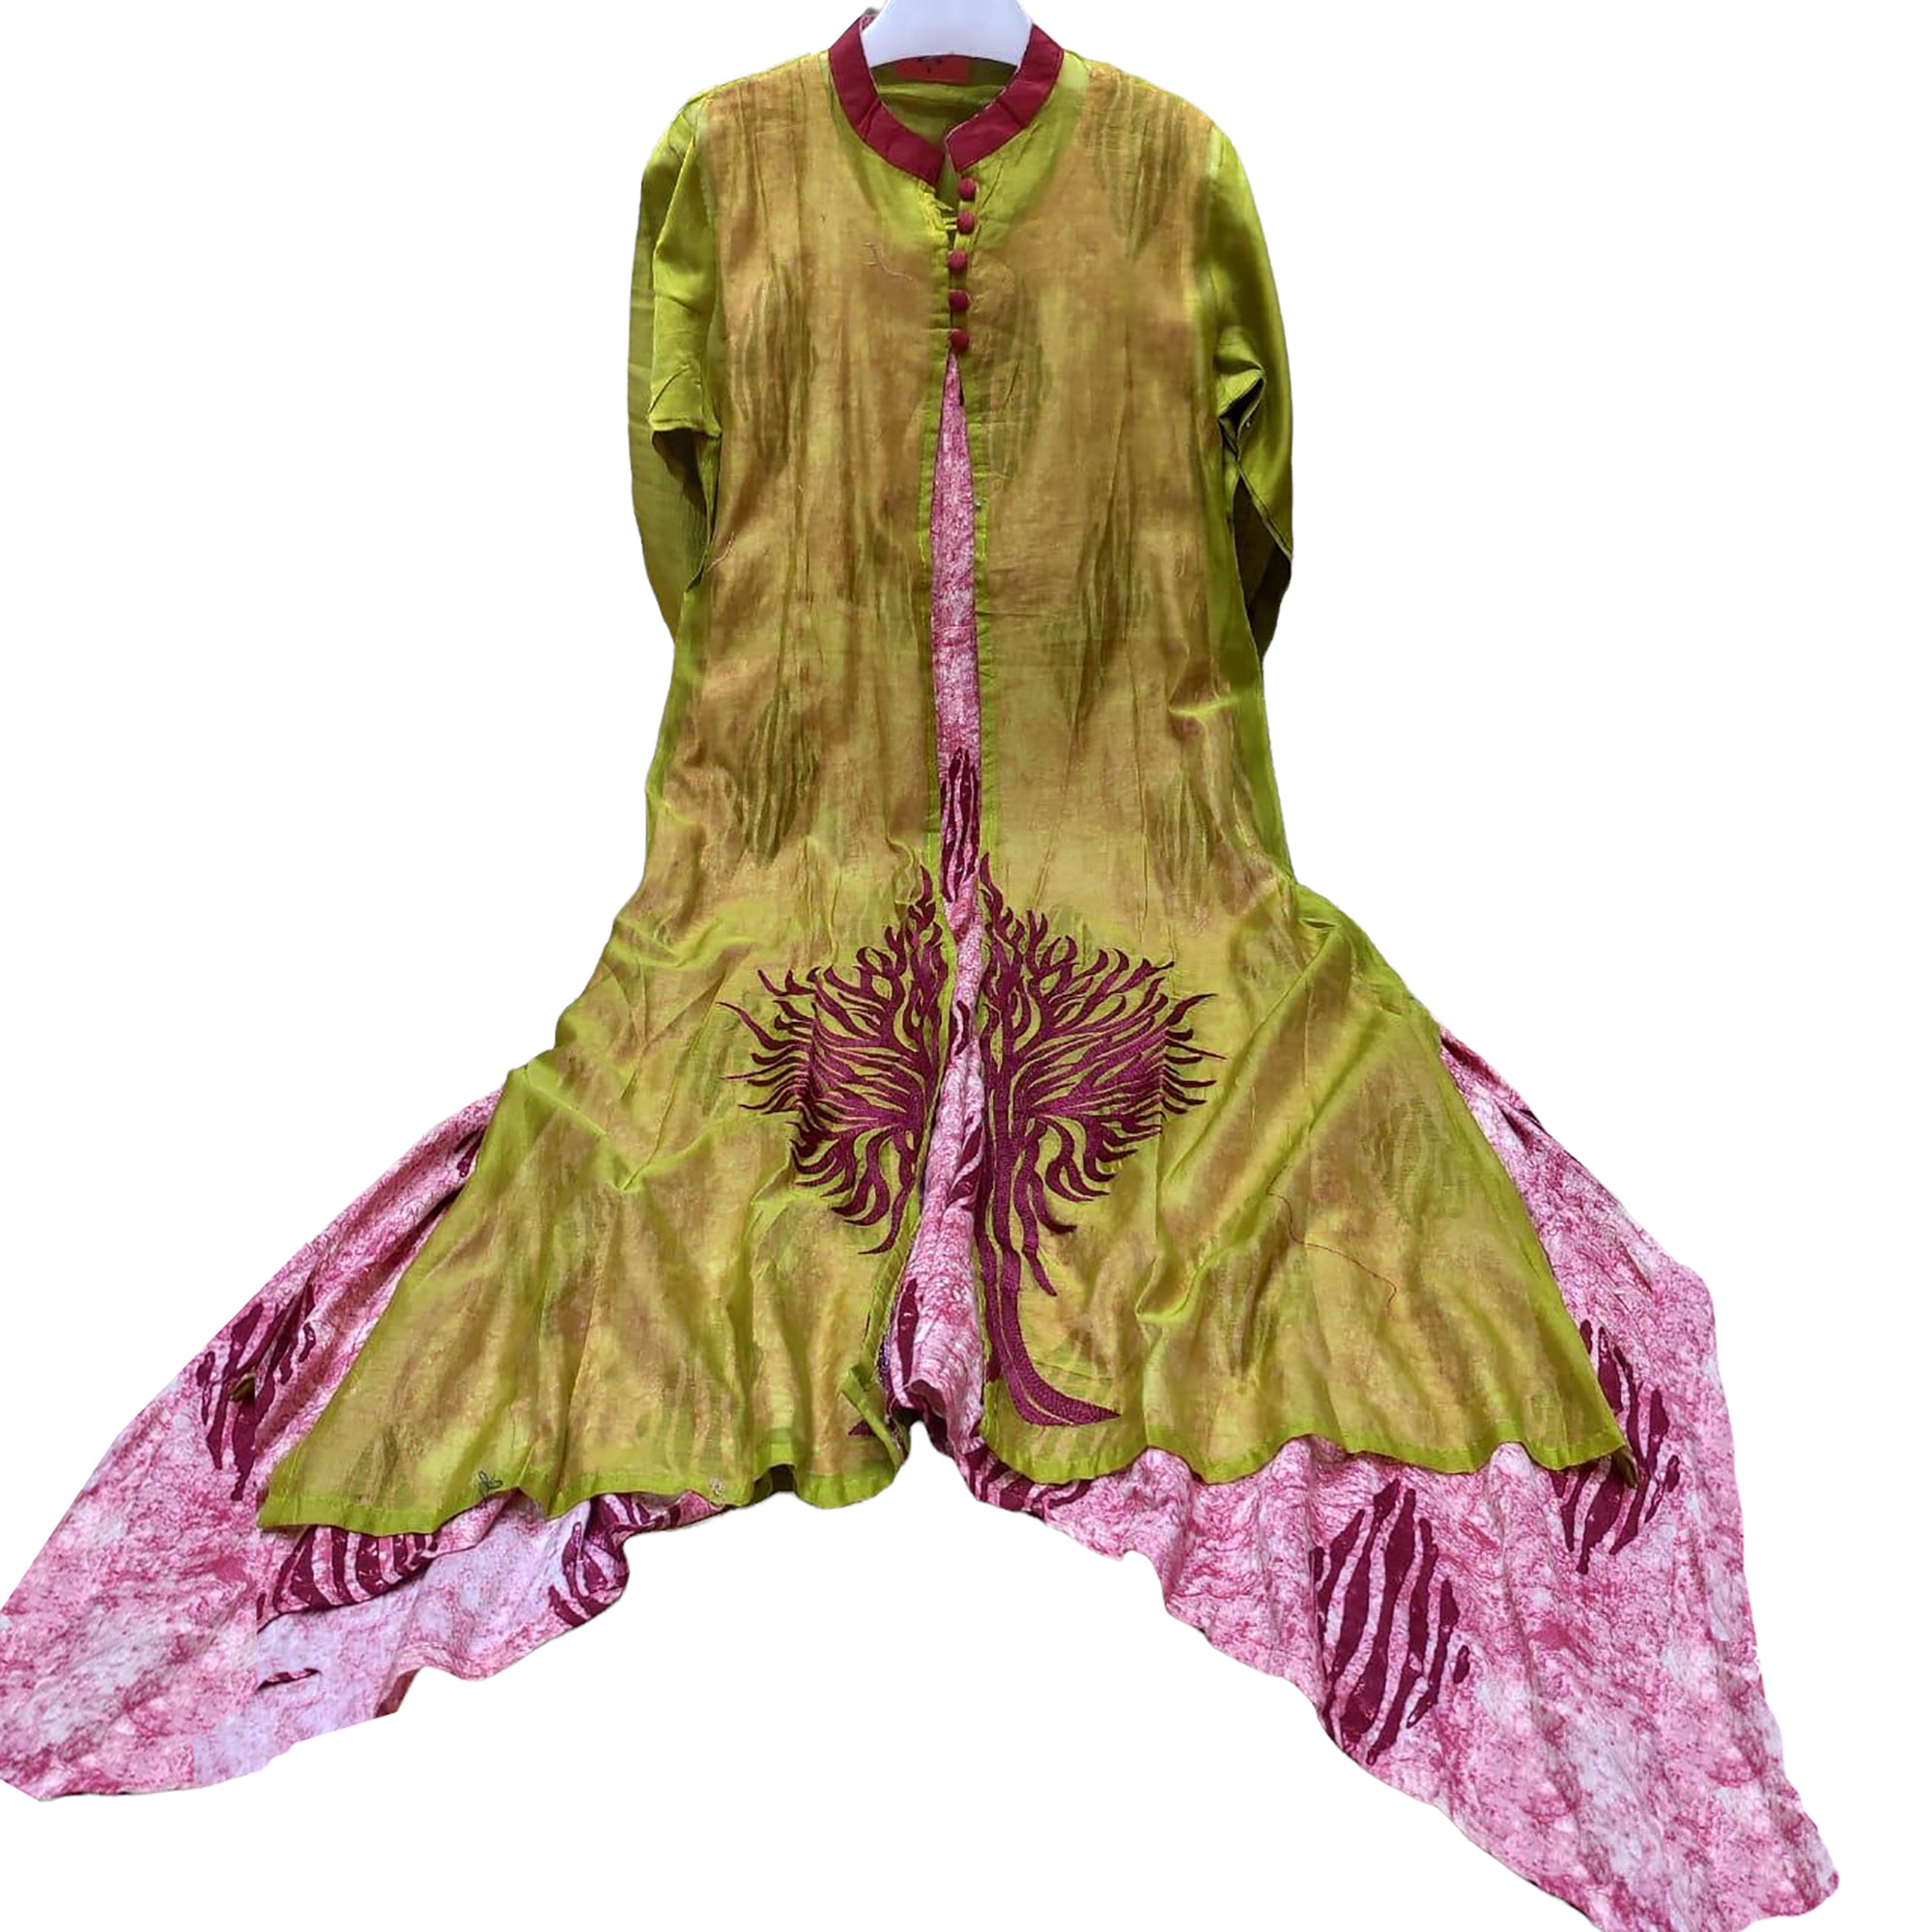 Pink Print Dress with Chartreuse jacket - Vintage India NYC